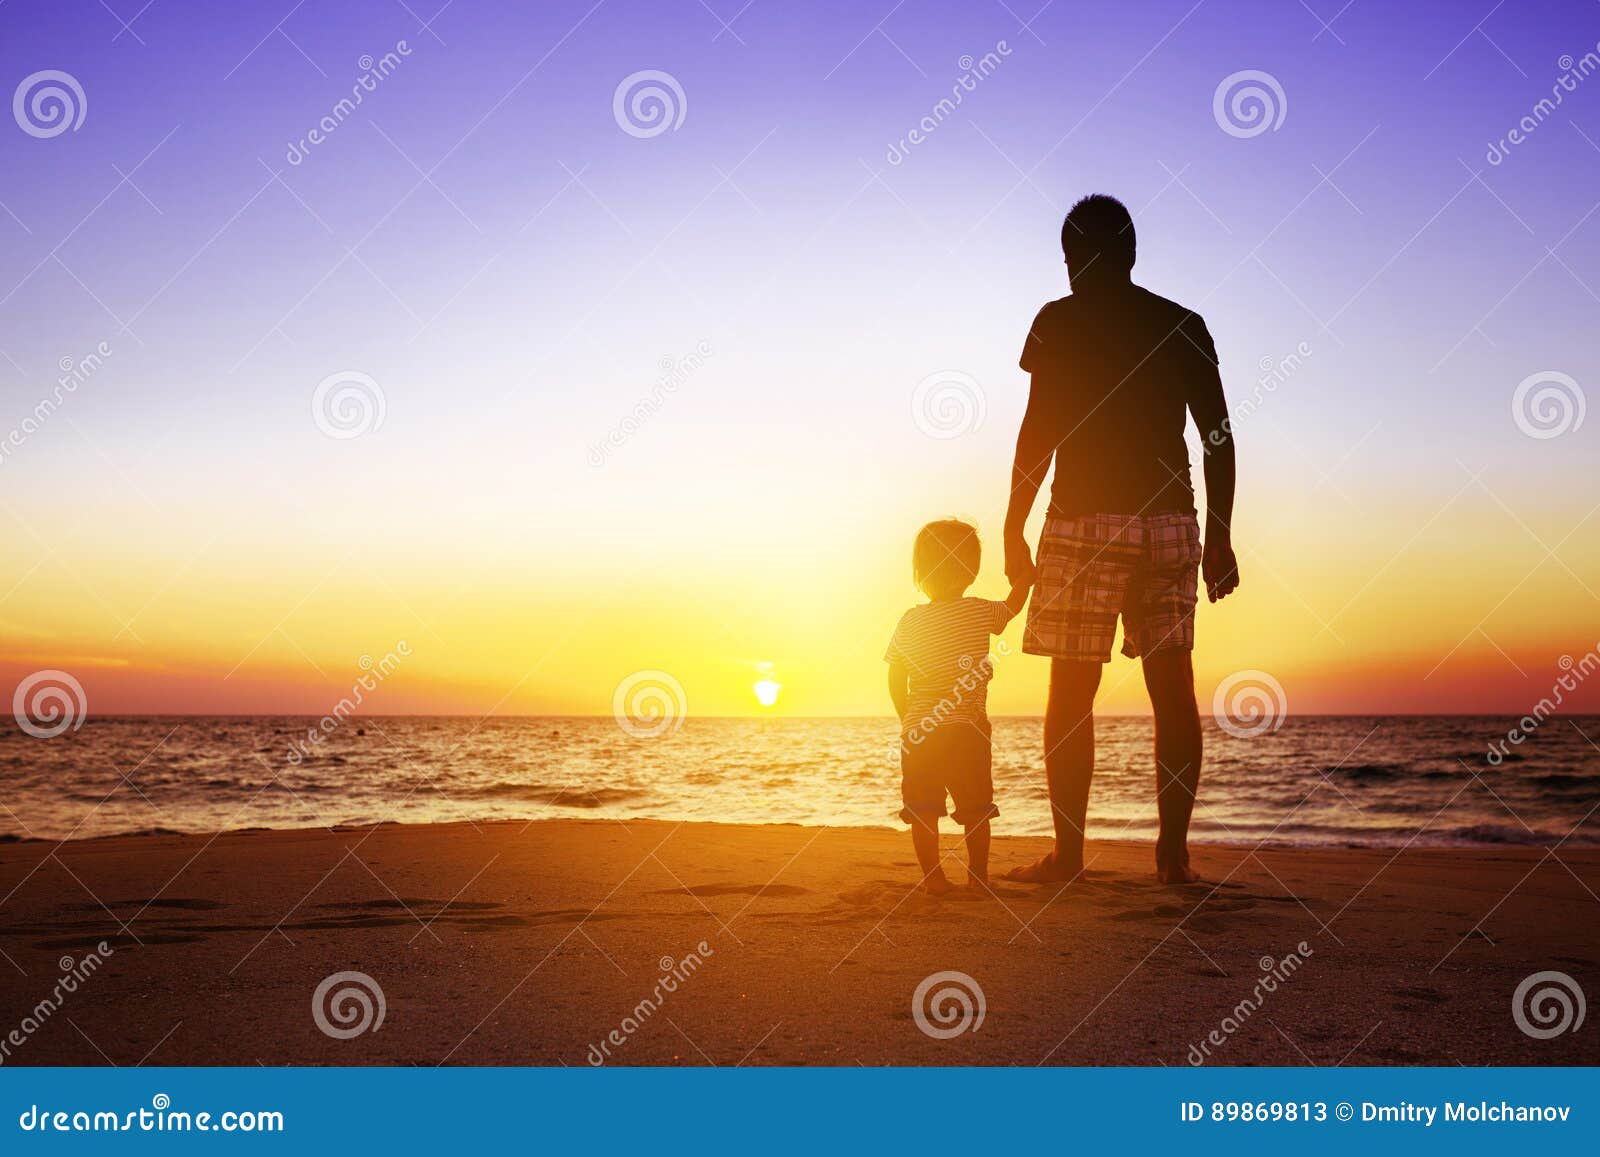 father and son at sunset beach